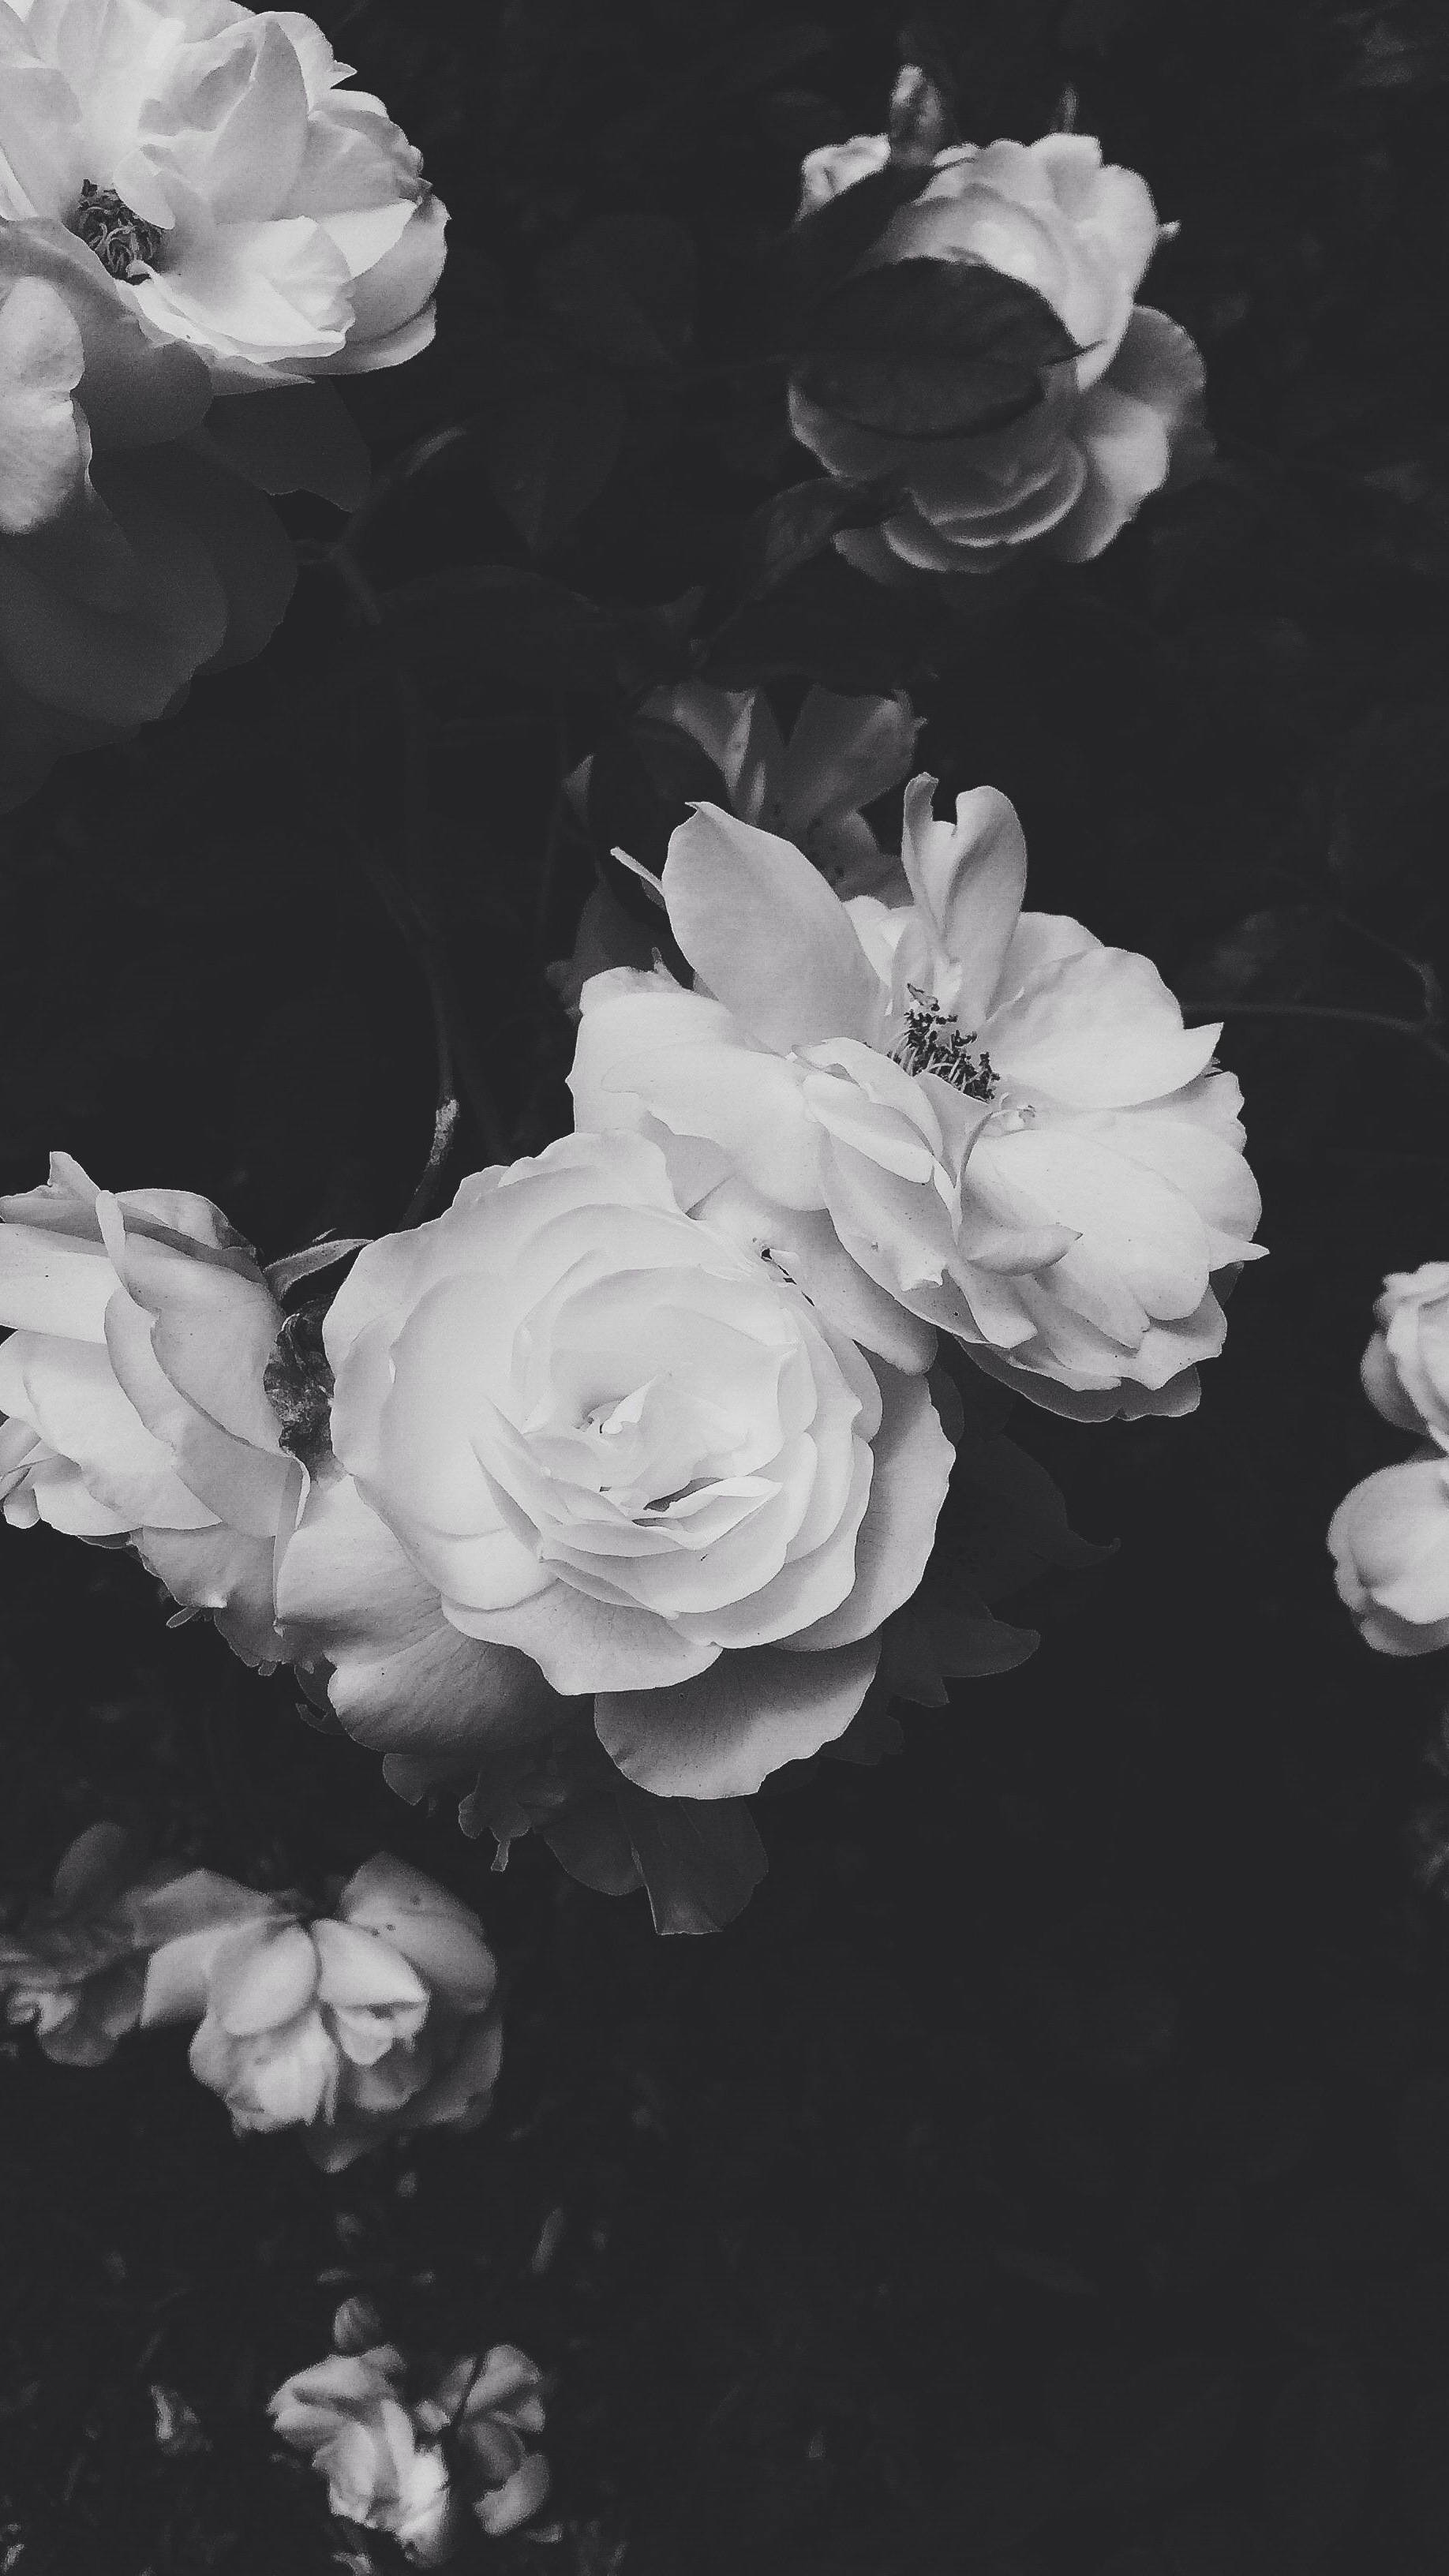 A black and white photo of some flowers - Roses